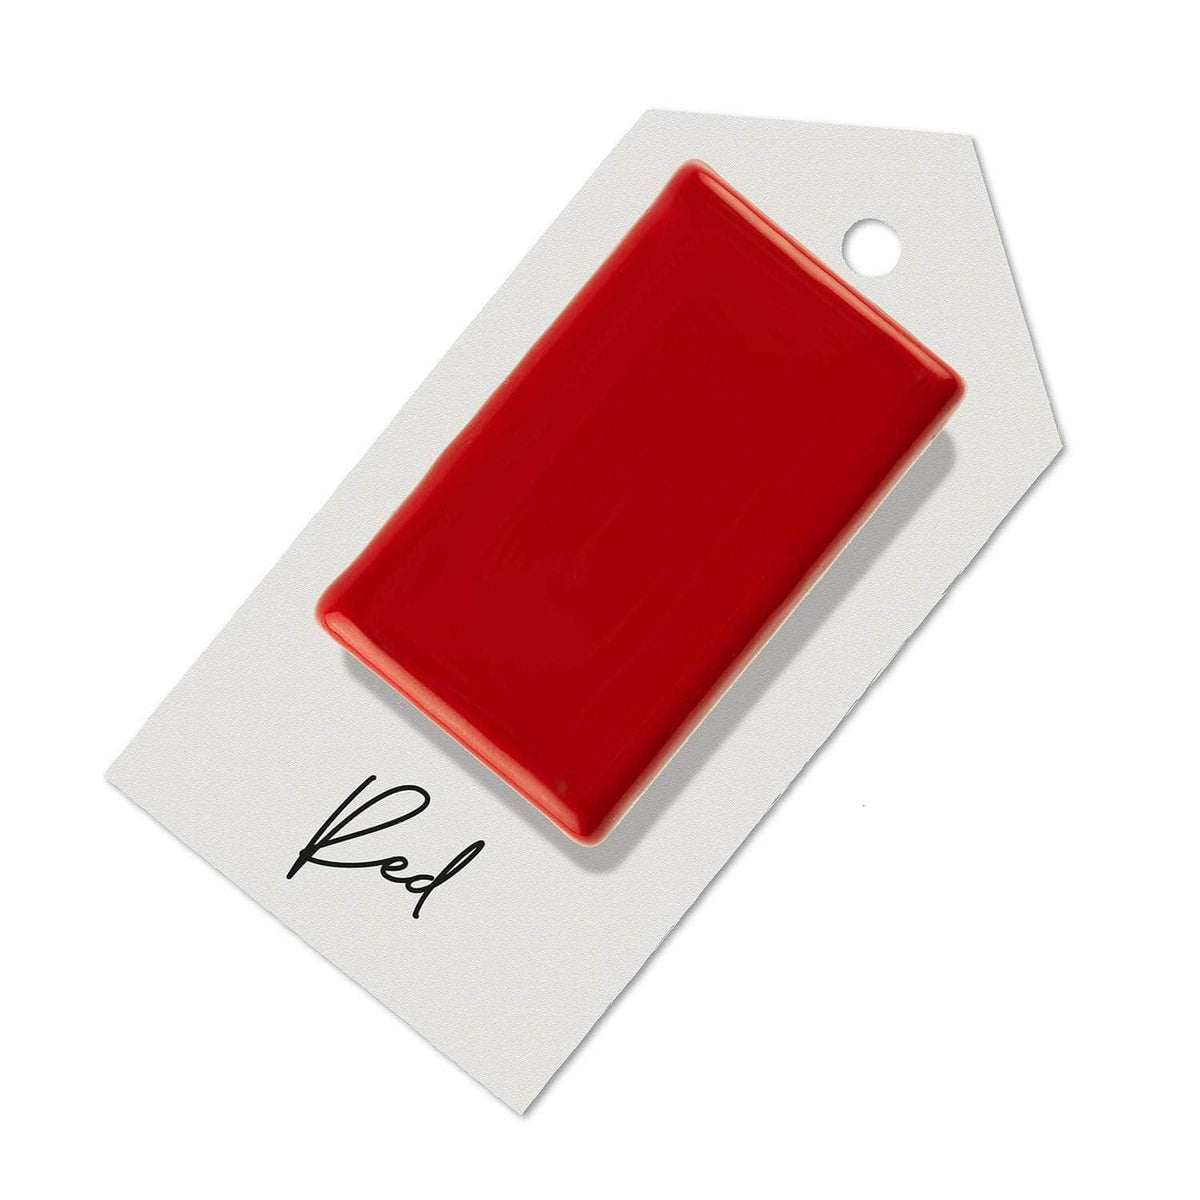 Red sample for Aga range cooker re-enamelling &amp; reconditioned cookers